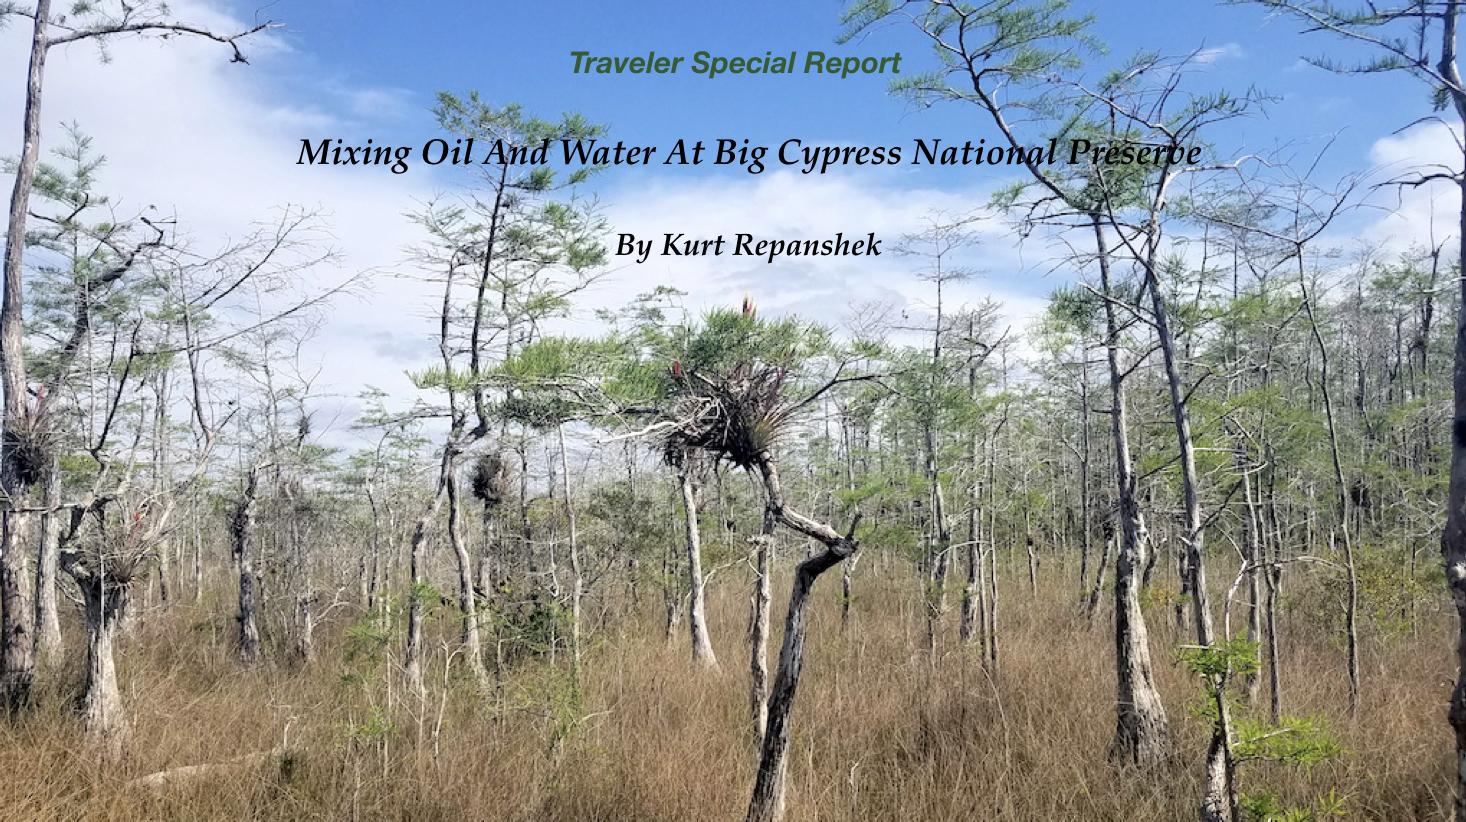 Impacts of oil exploration in Big Cypress National Preserve/Kim O'Connell